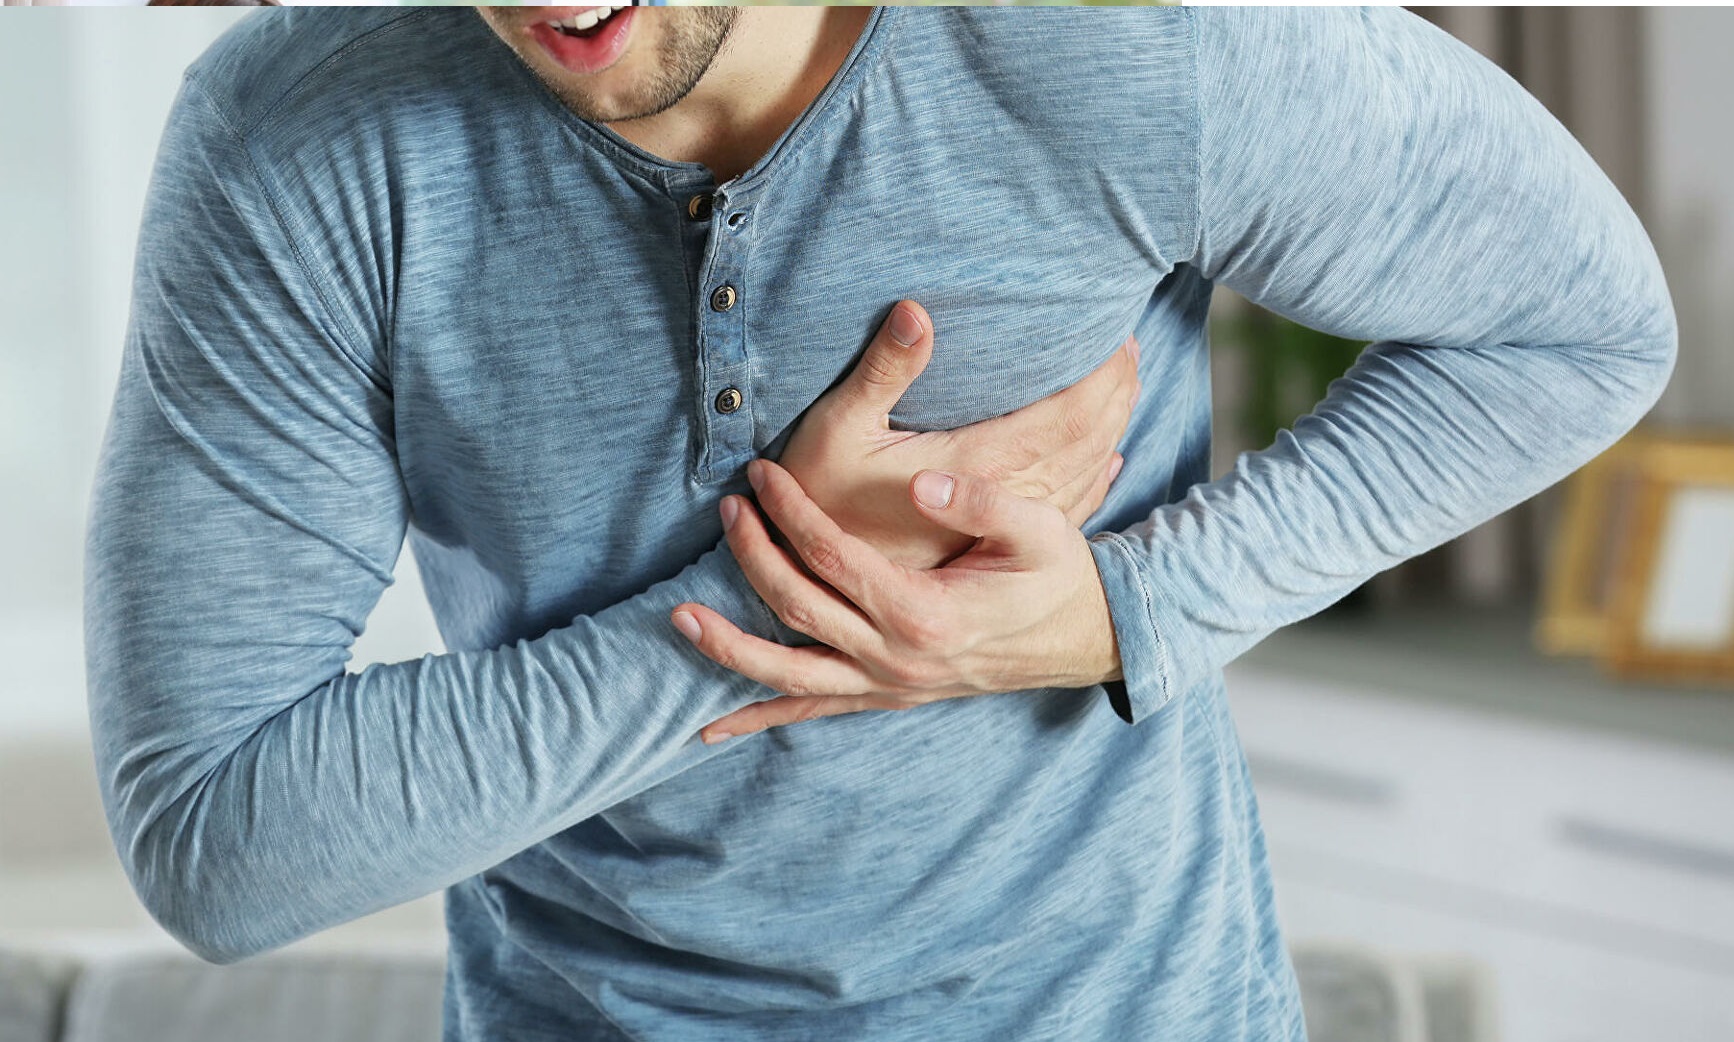 Health Tips: What is heart attack and heart failure? Take care of yourself in both cases